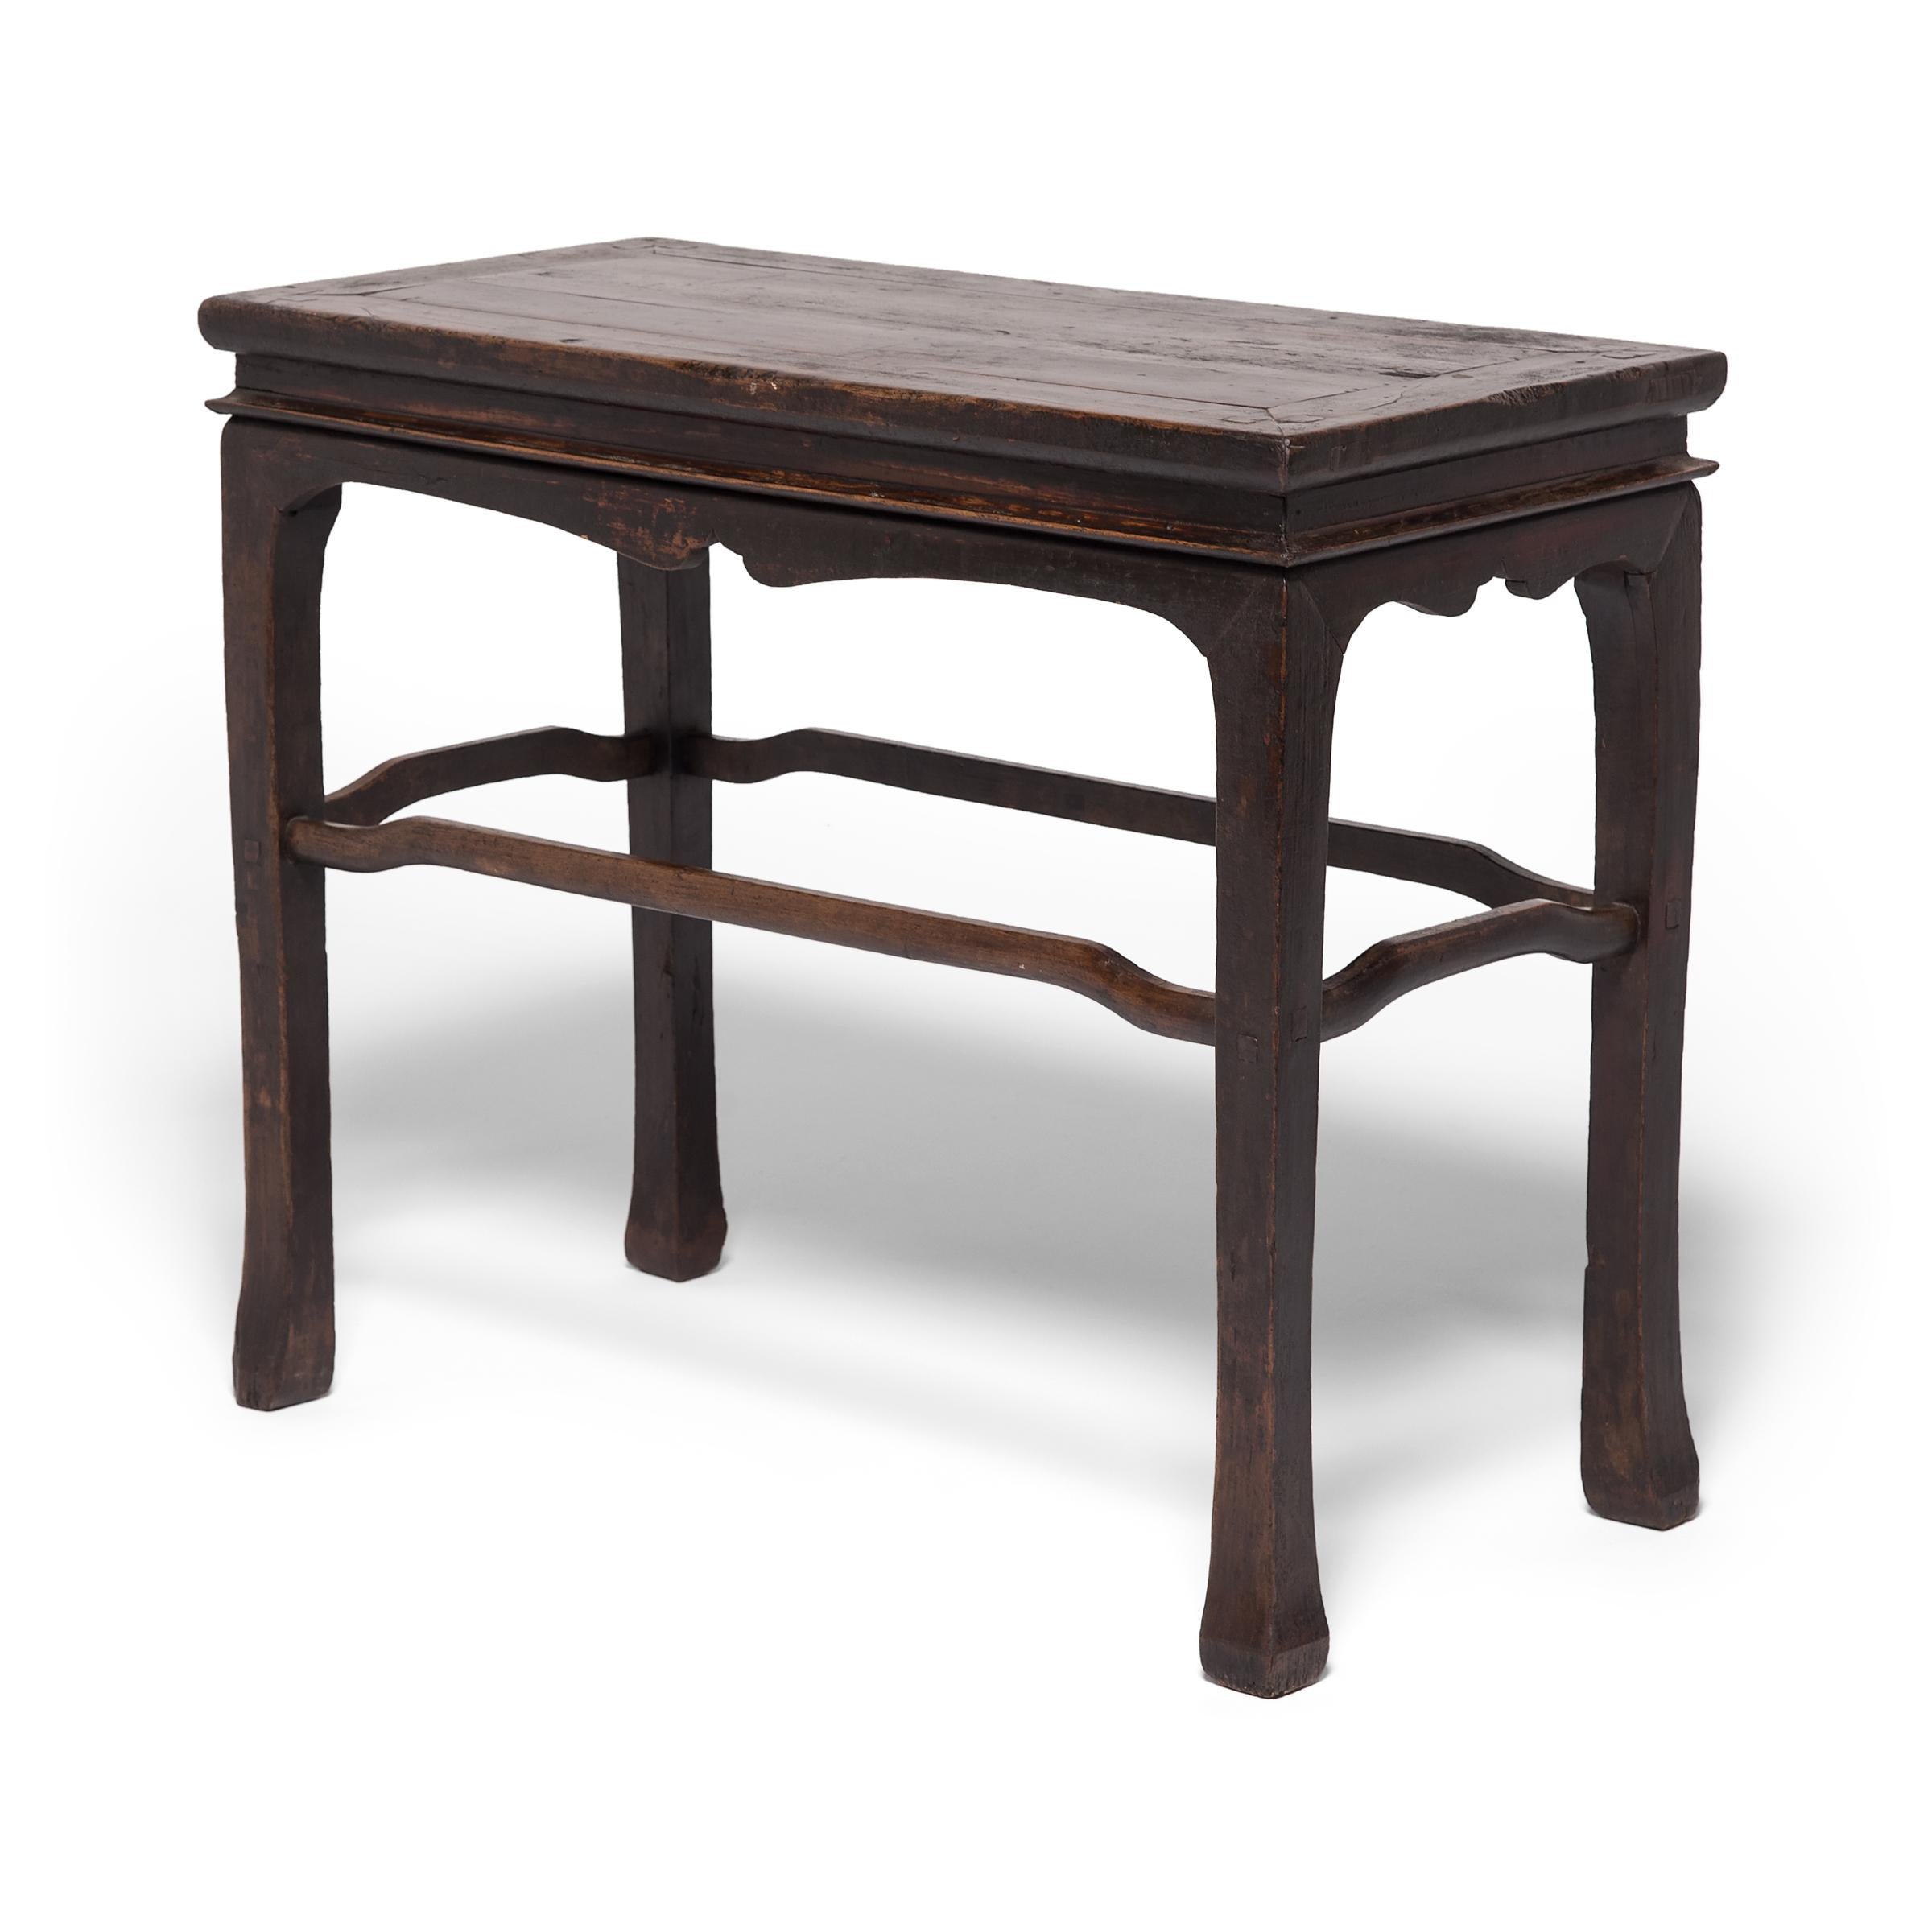 Handcrafted of northern elmwood over a century ago, this simple wine table expresses the clean lines and elegant restraint that make Qing-dynasty carpentry so sought after. Emphasizing the table's refined form, a simple scalloped apron flows into